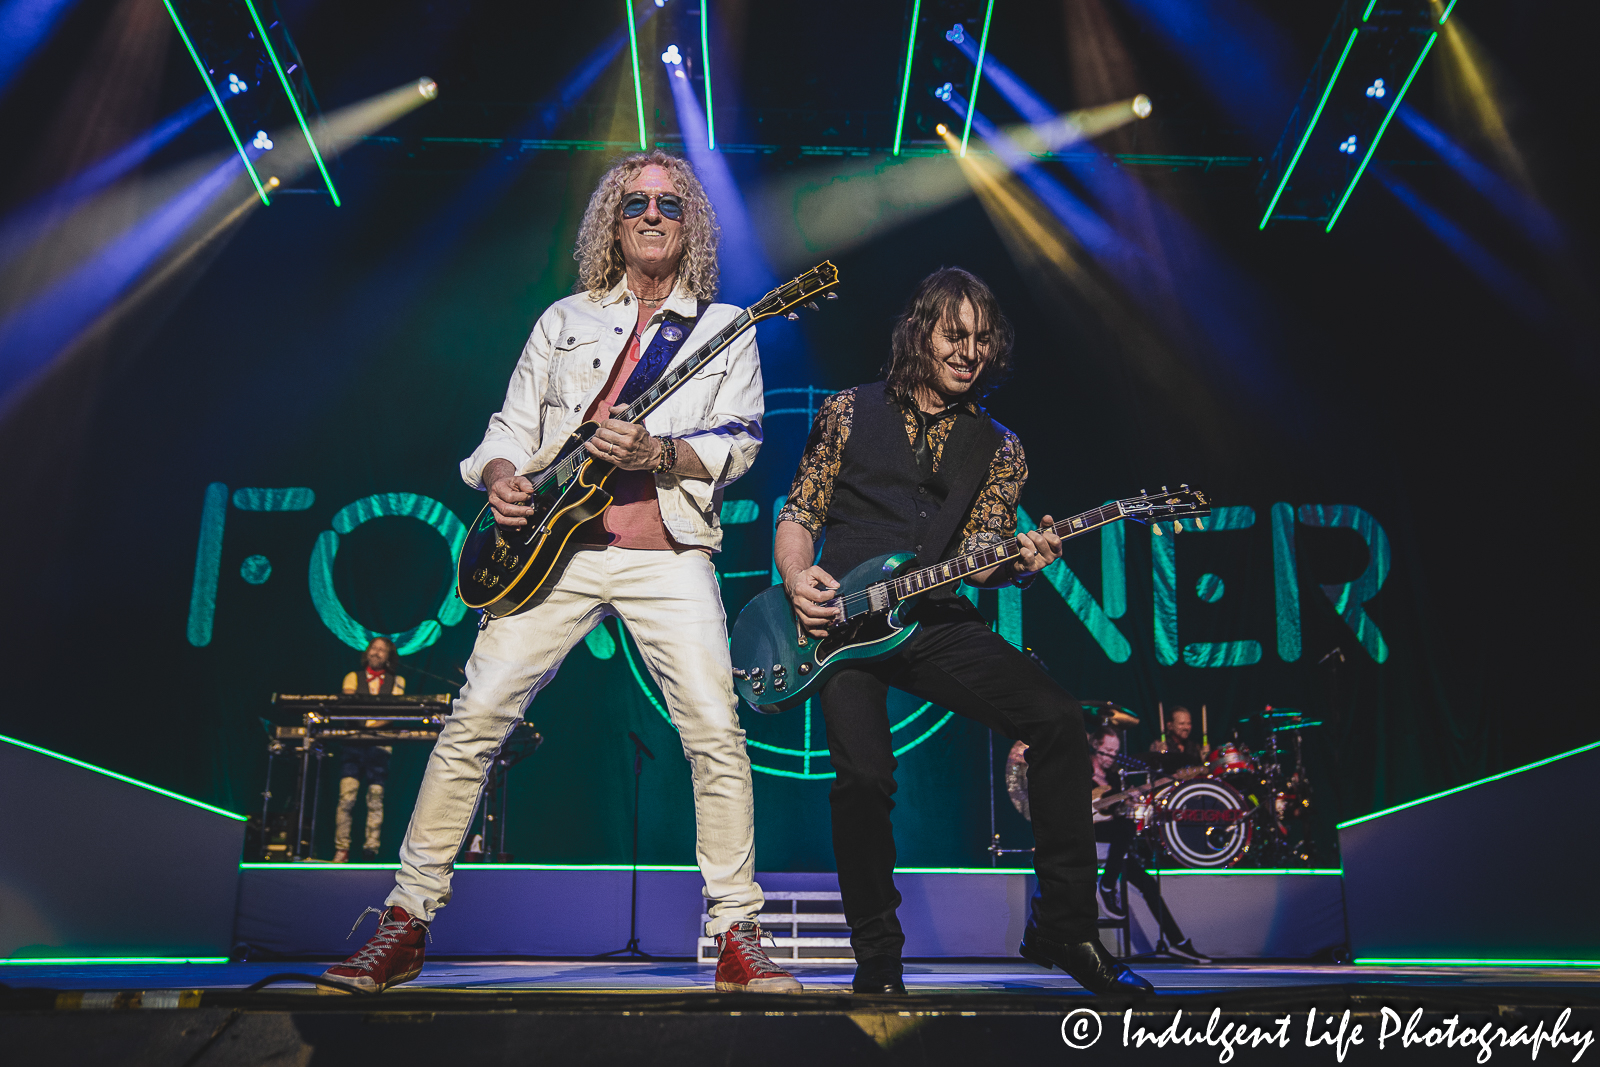 Foreigner guitar players Bruce Watson and Luis Maldonado performing together on "The Historic Farewell Tour" at Starlight Theatre in Kansas City, MO on July 18, 2023.